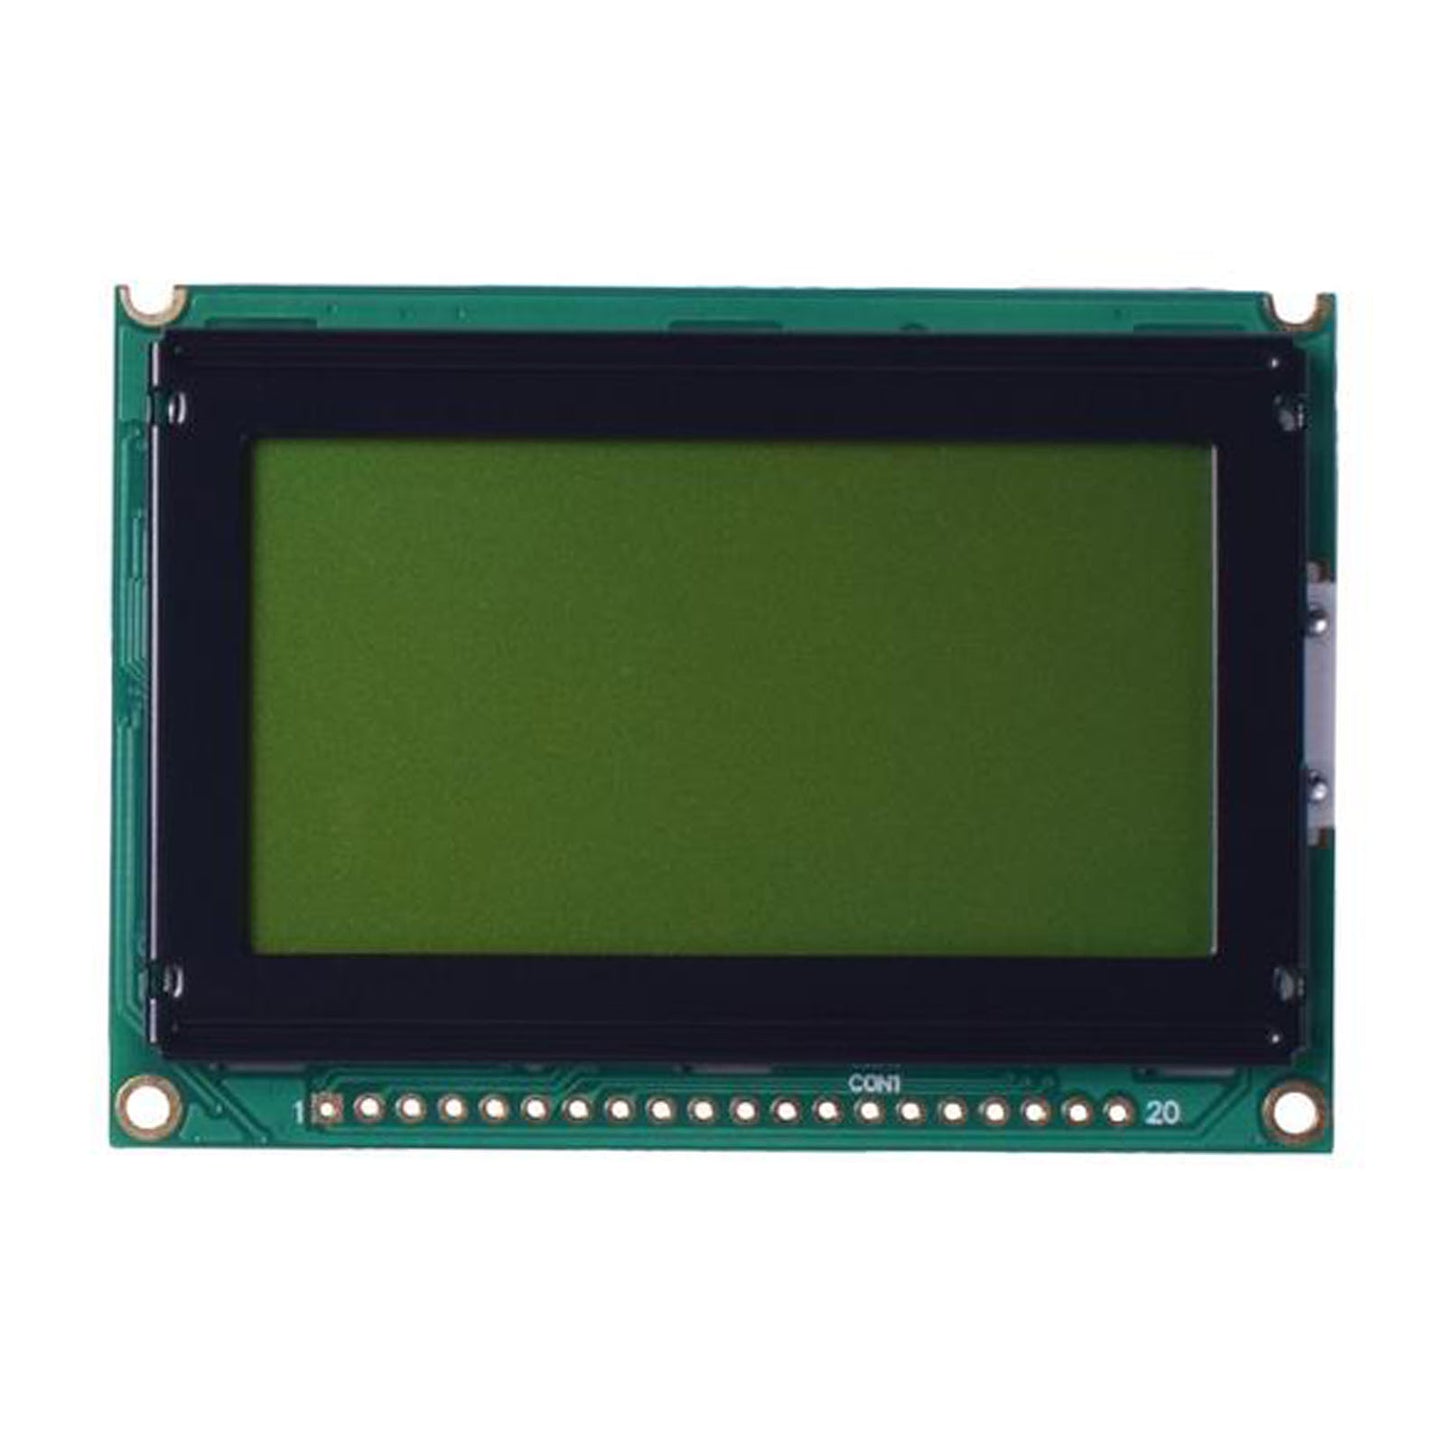 128x64 LCD 2.62 inch graphic green display module with MCU interface